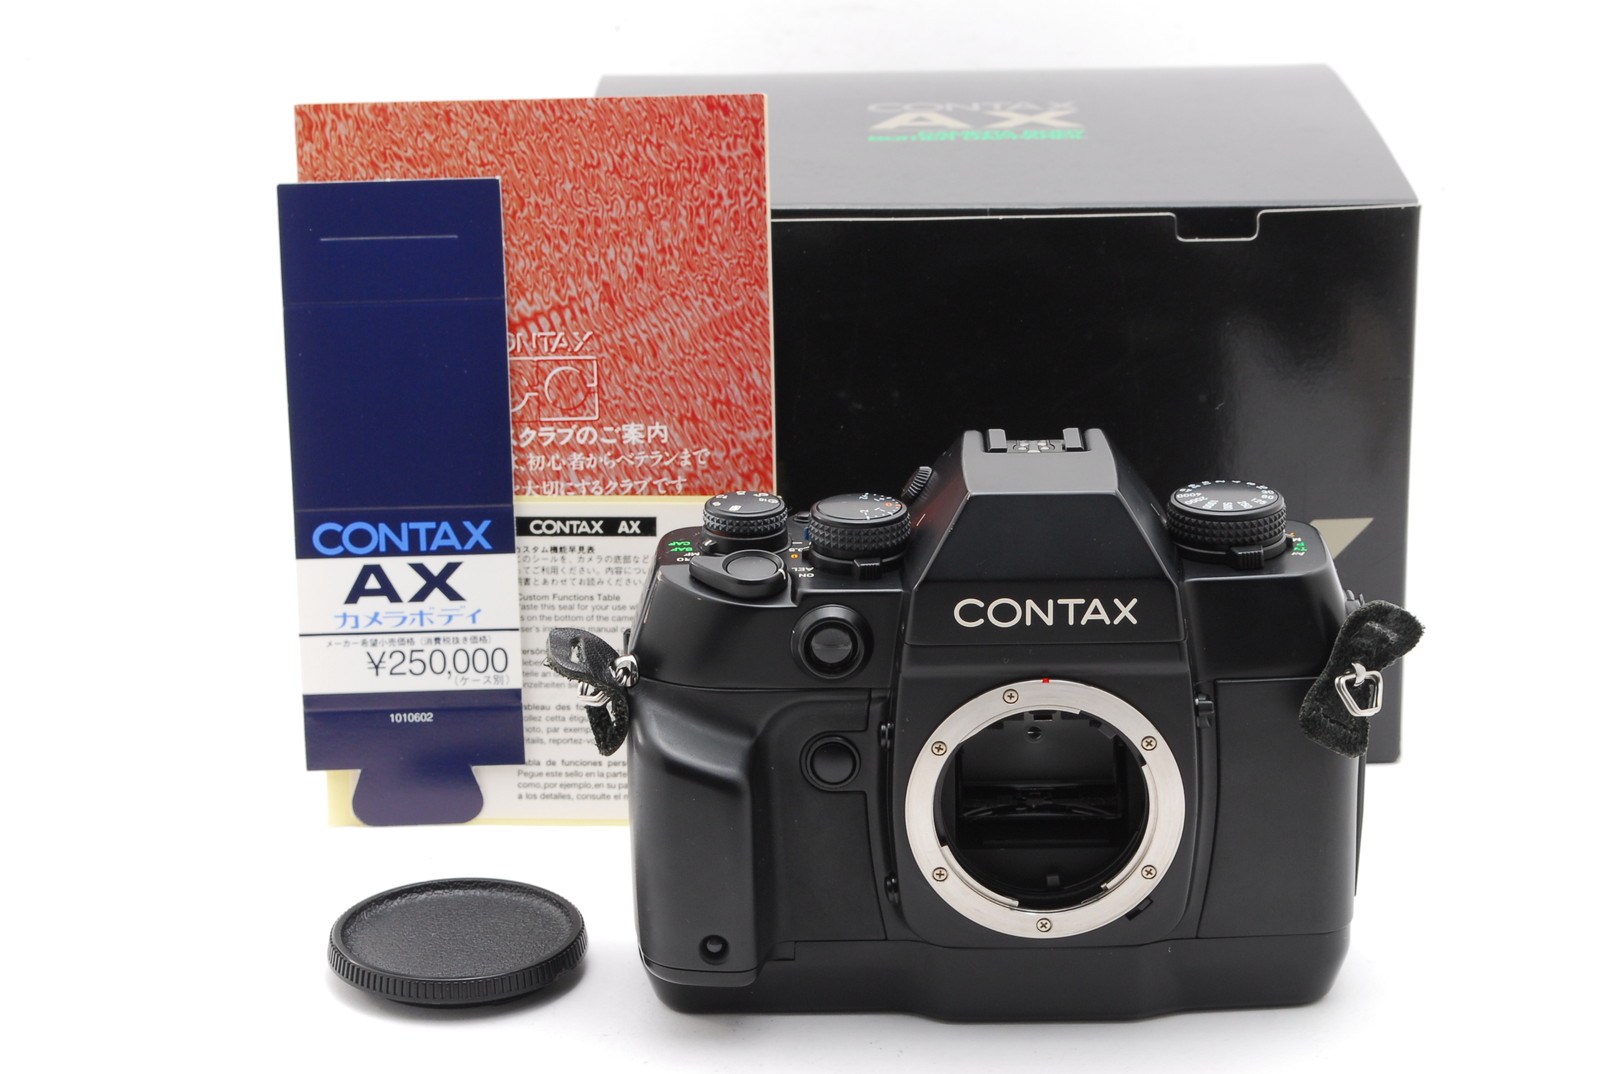 PROMOTION.😊 NEAR MINT Contax AX 35mm SLR Film Camera Body Only, Box from Japan